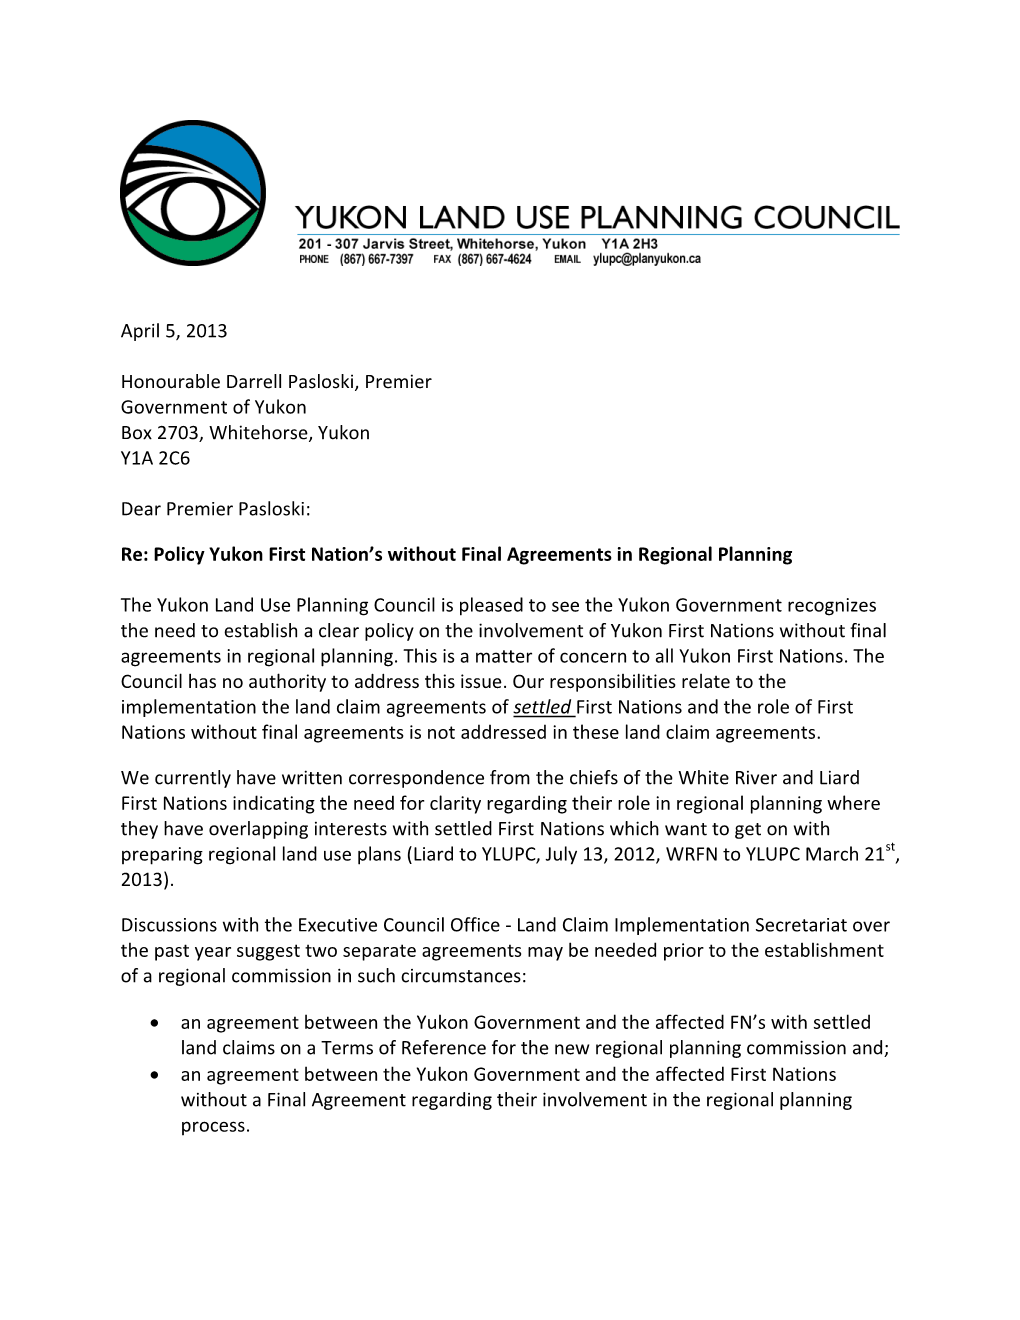 Pdf Policy on Involving Yukon First Nations Without Final Agreements in Regional Land Use Planning